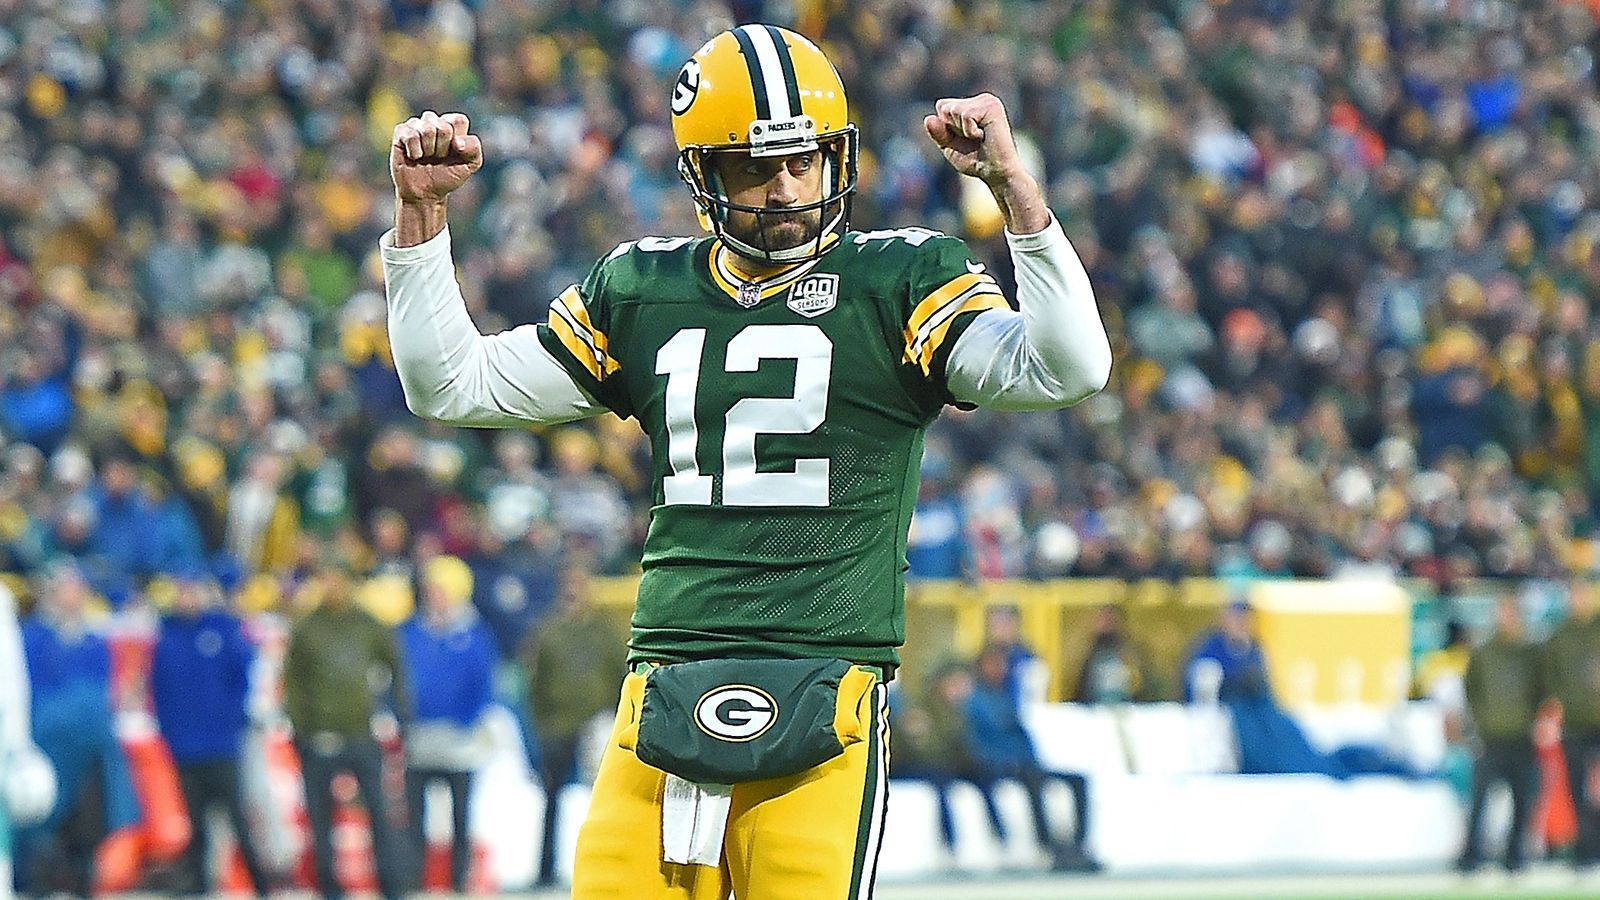 
                <strong>Green Bay Packers (Aaron Rodgers)</strong><br>
                16.484.856 Dollar für drei Quarterbacks
              